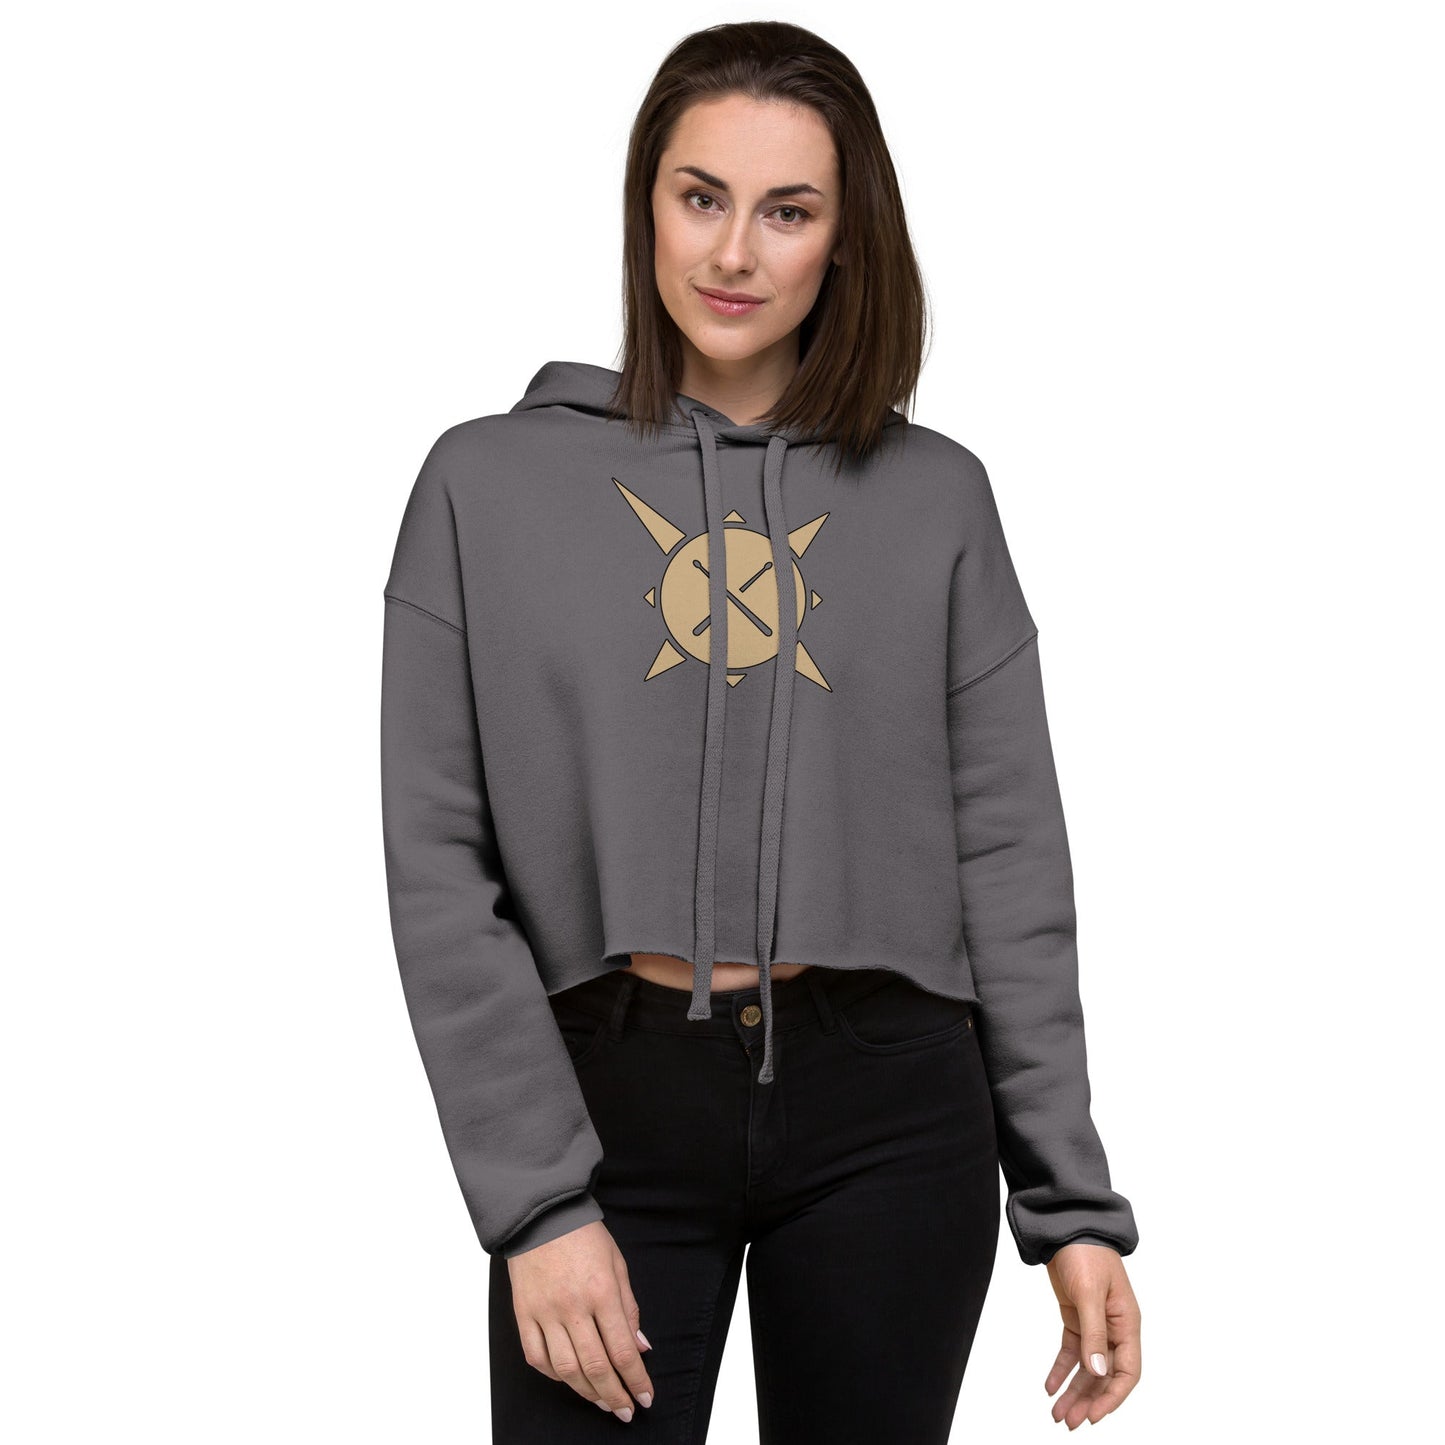 Drums of the Sun Soft Crop Hoodie - BeExtra! Apparel & More